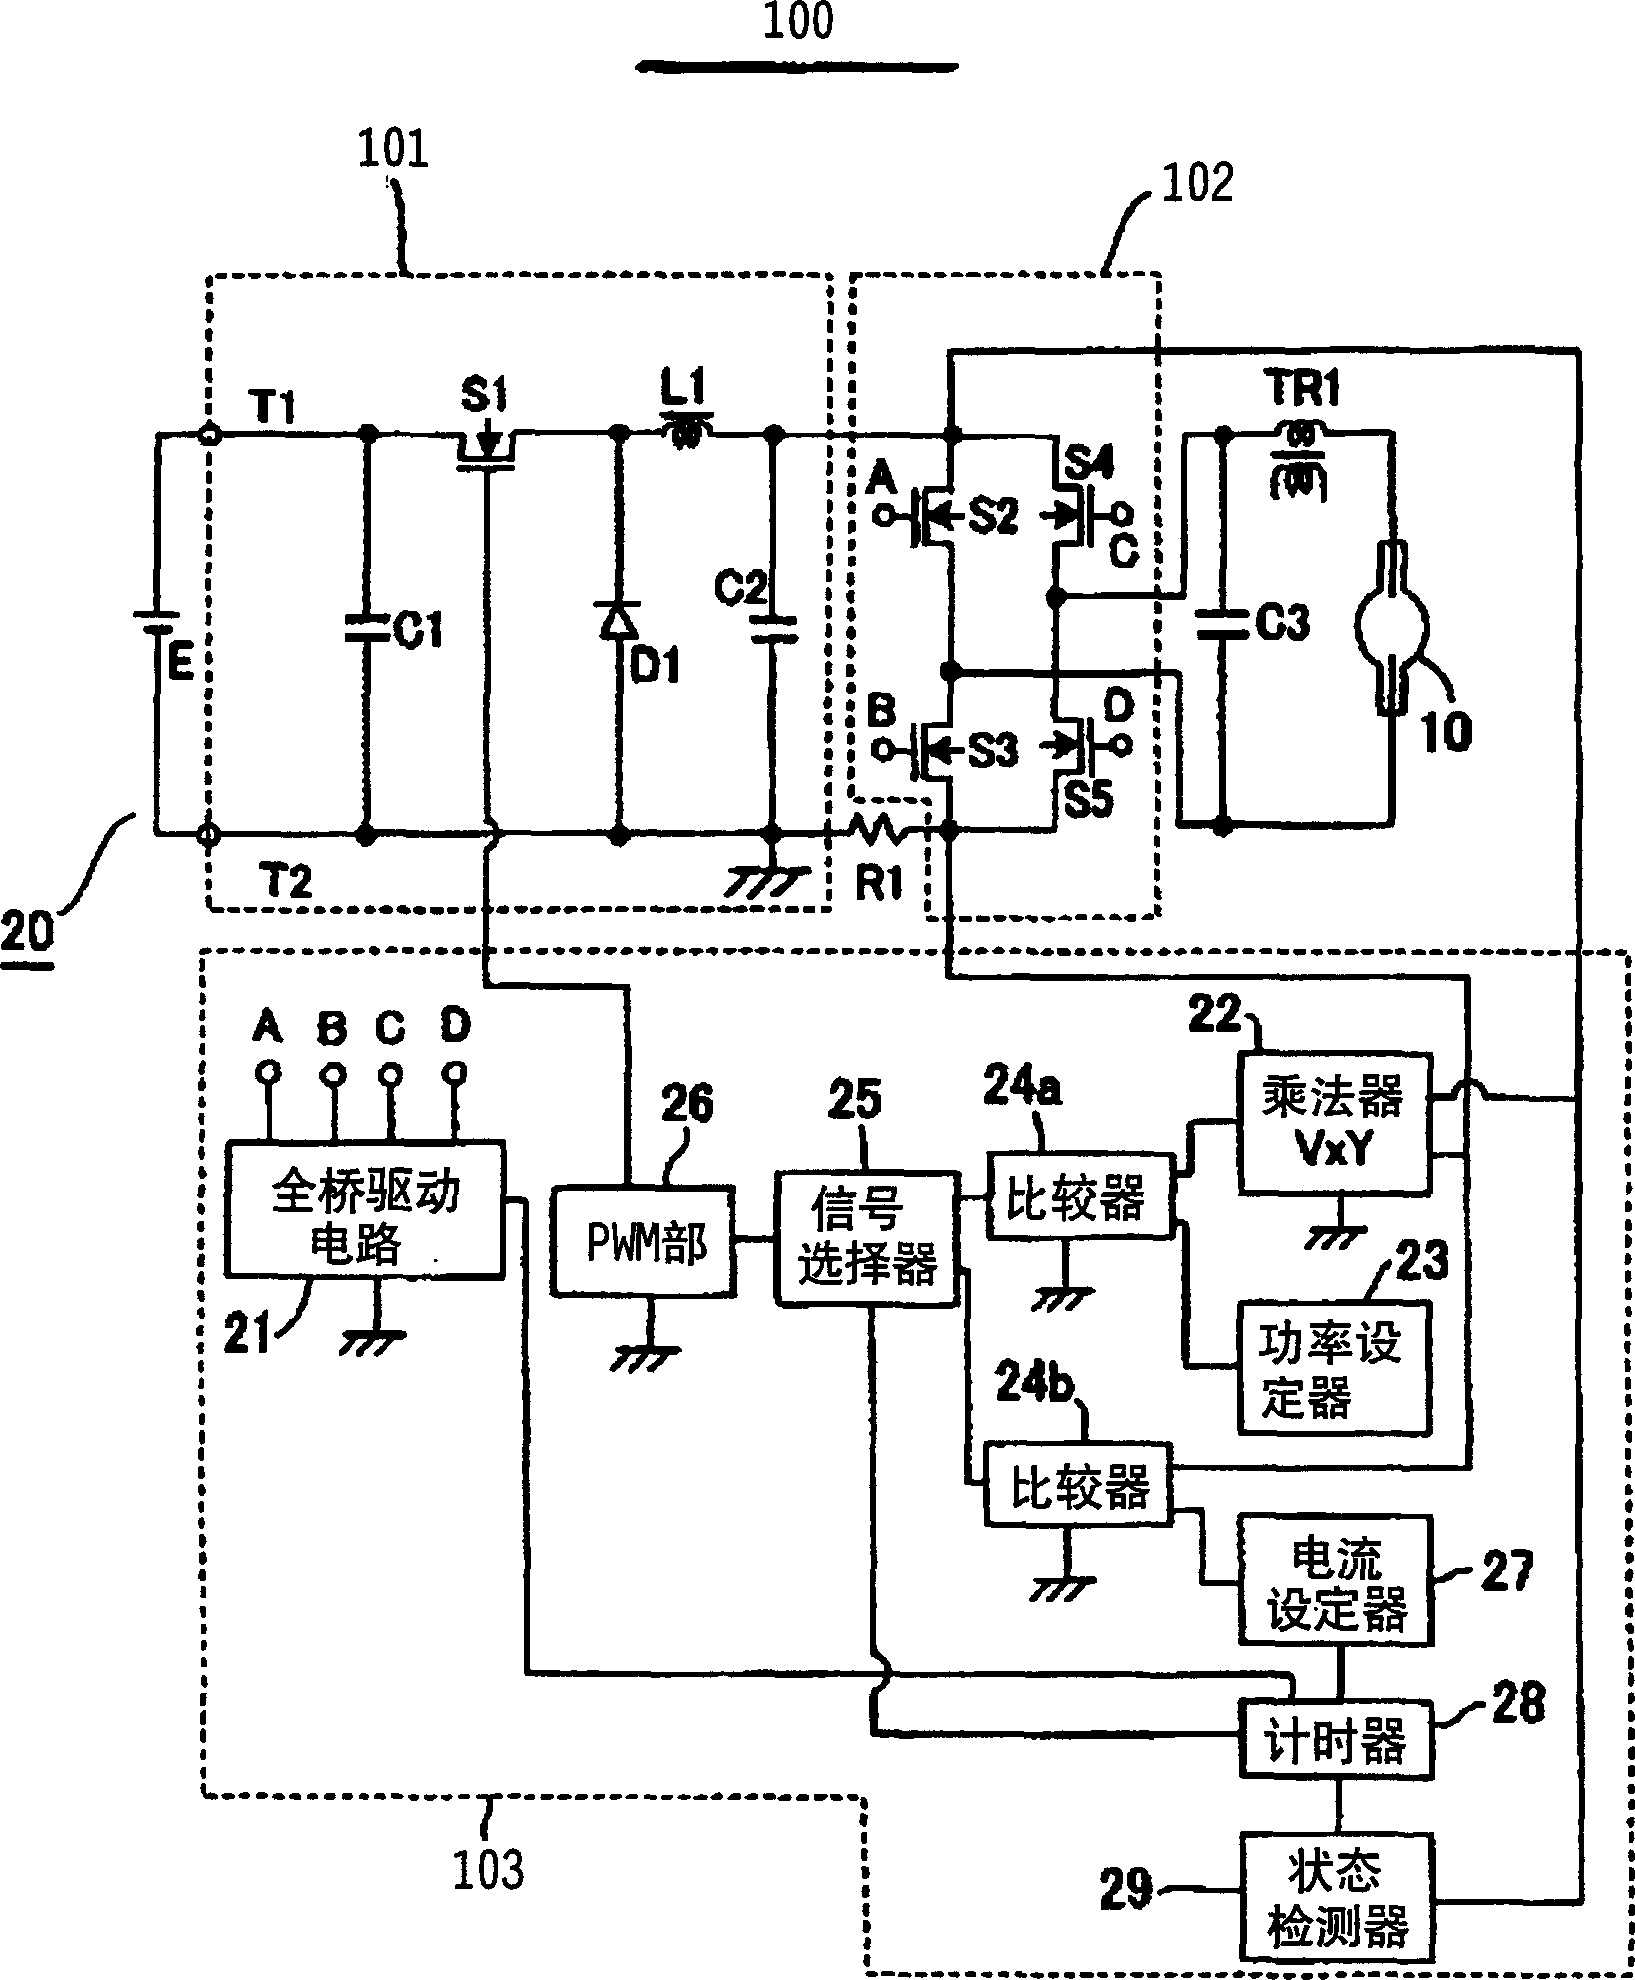 Device for operating a short arc type hid lamp